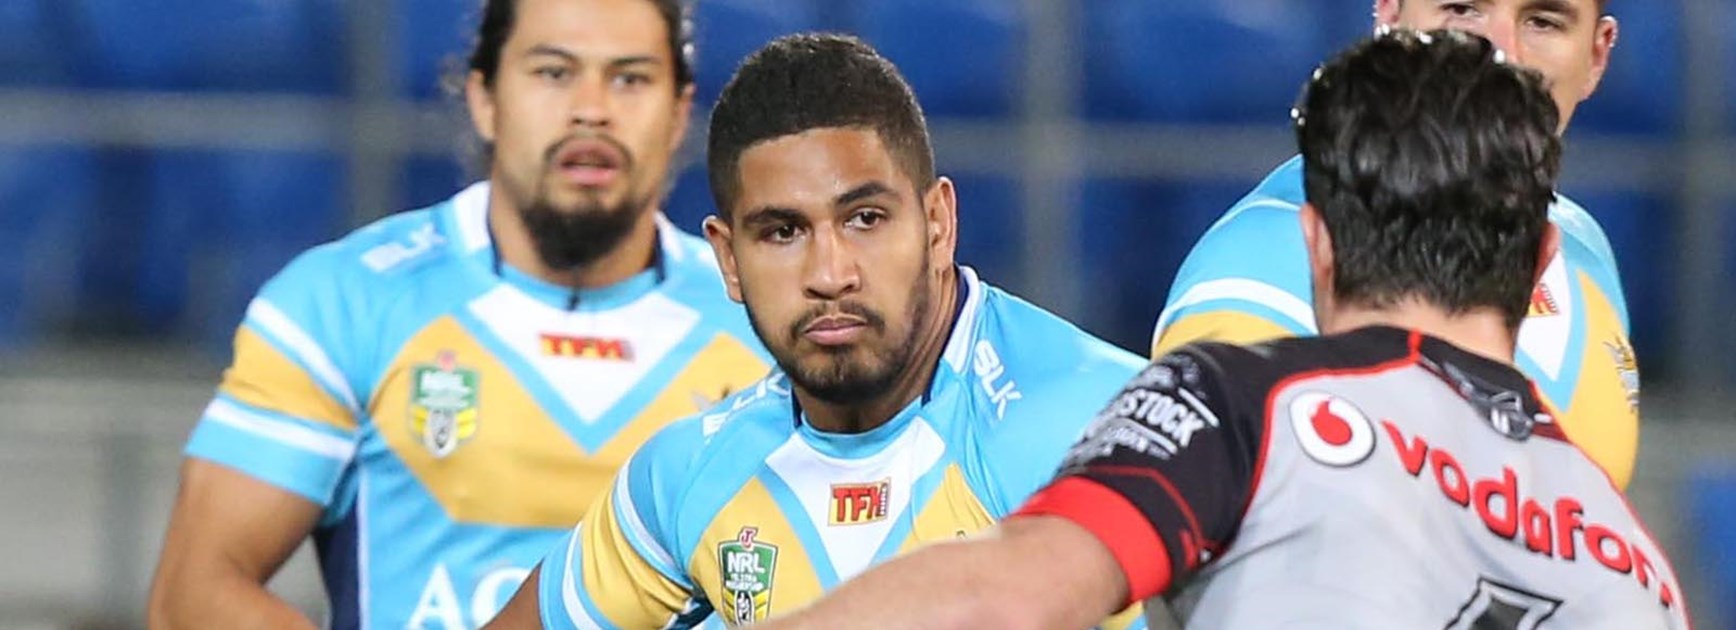 Nene Macdonald makes his second start since his mid-season switch to the Titans on Sunday.